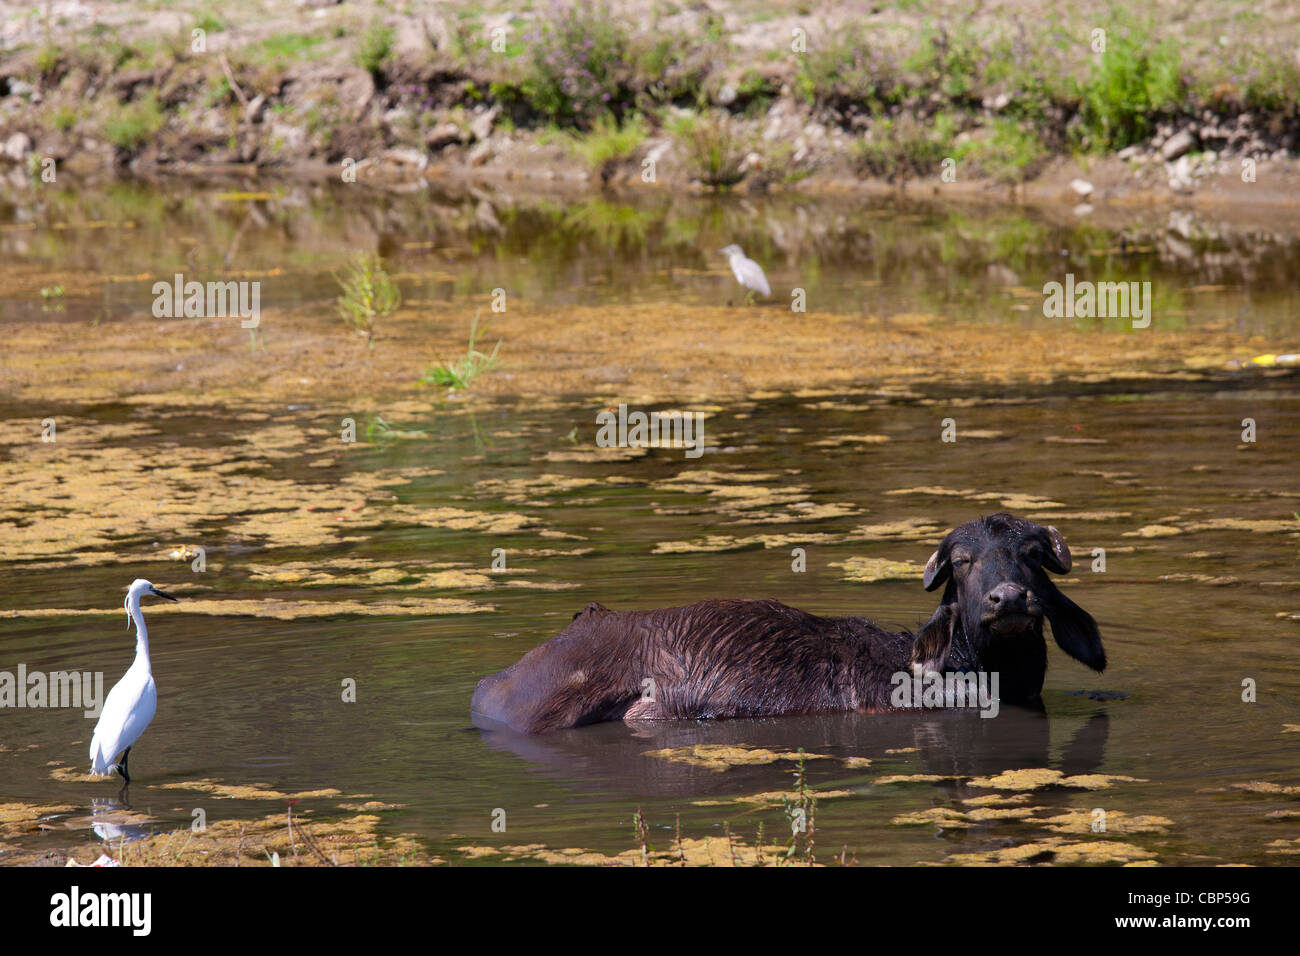 Buffalo watched by egret bird bathing in lake at Ranakpur in Pali District of Rajasthan, Western India Stock Photo